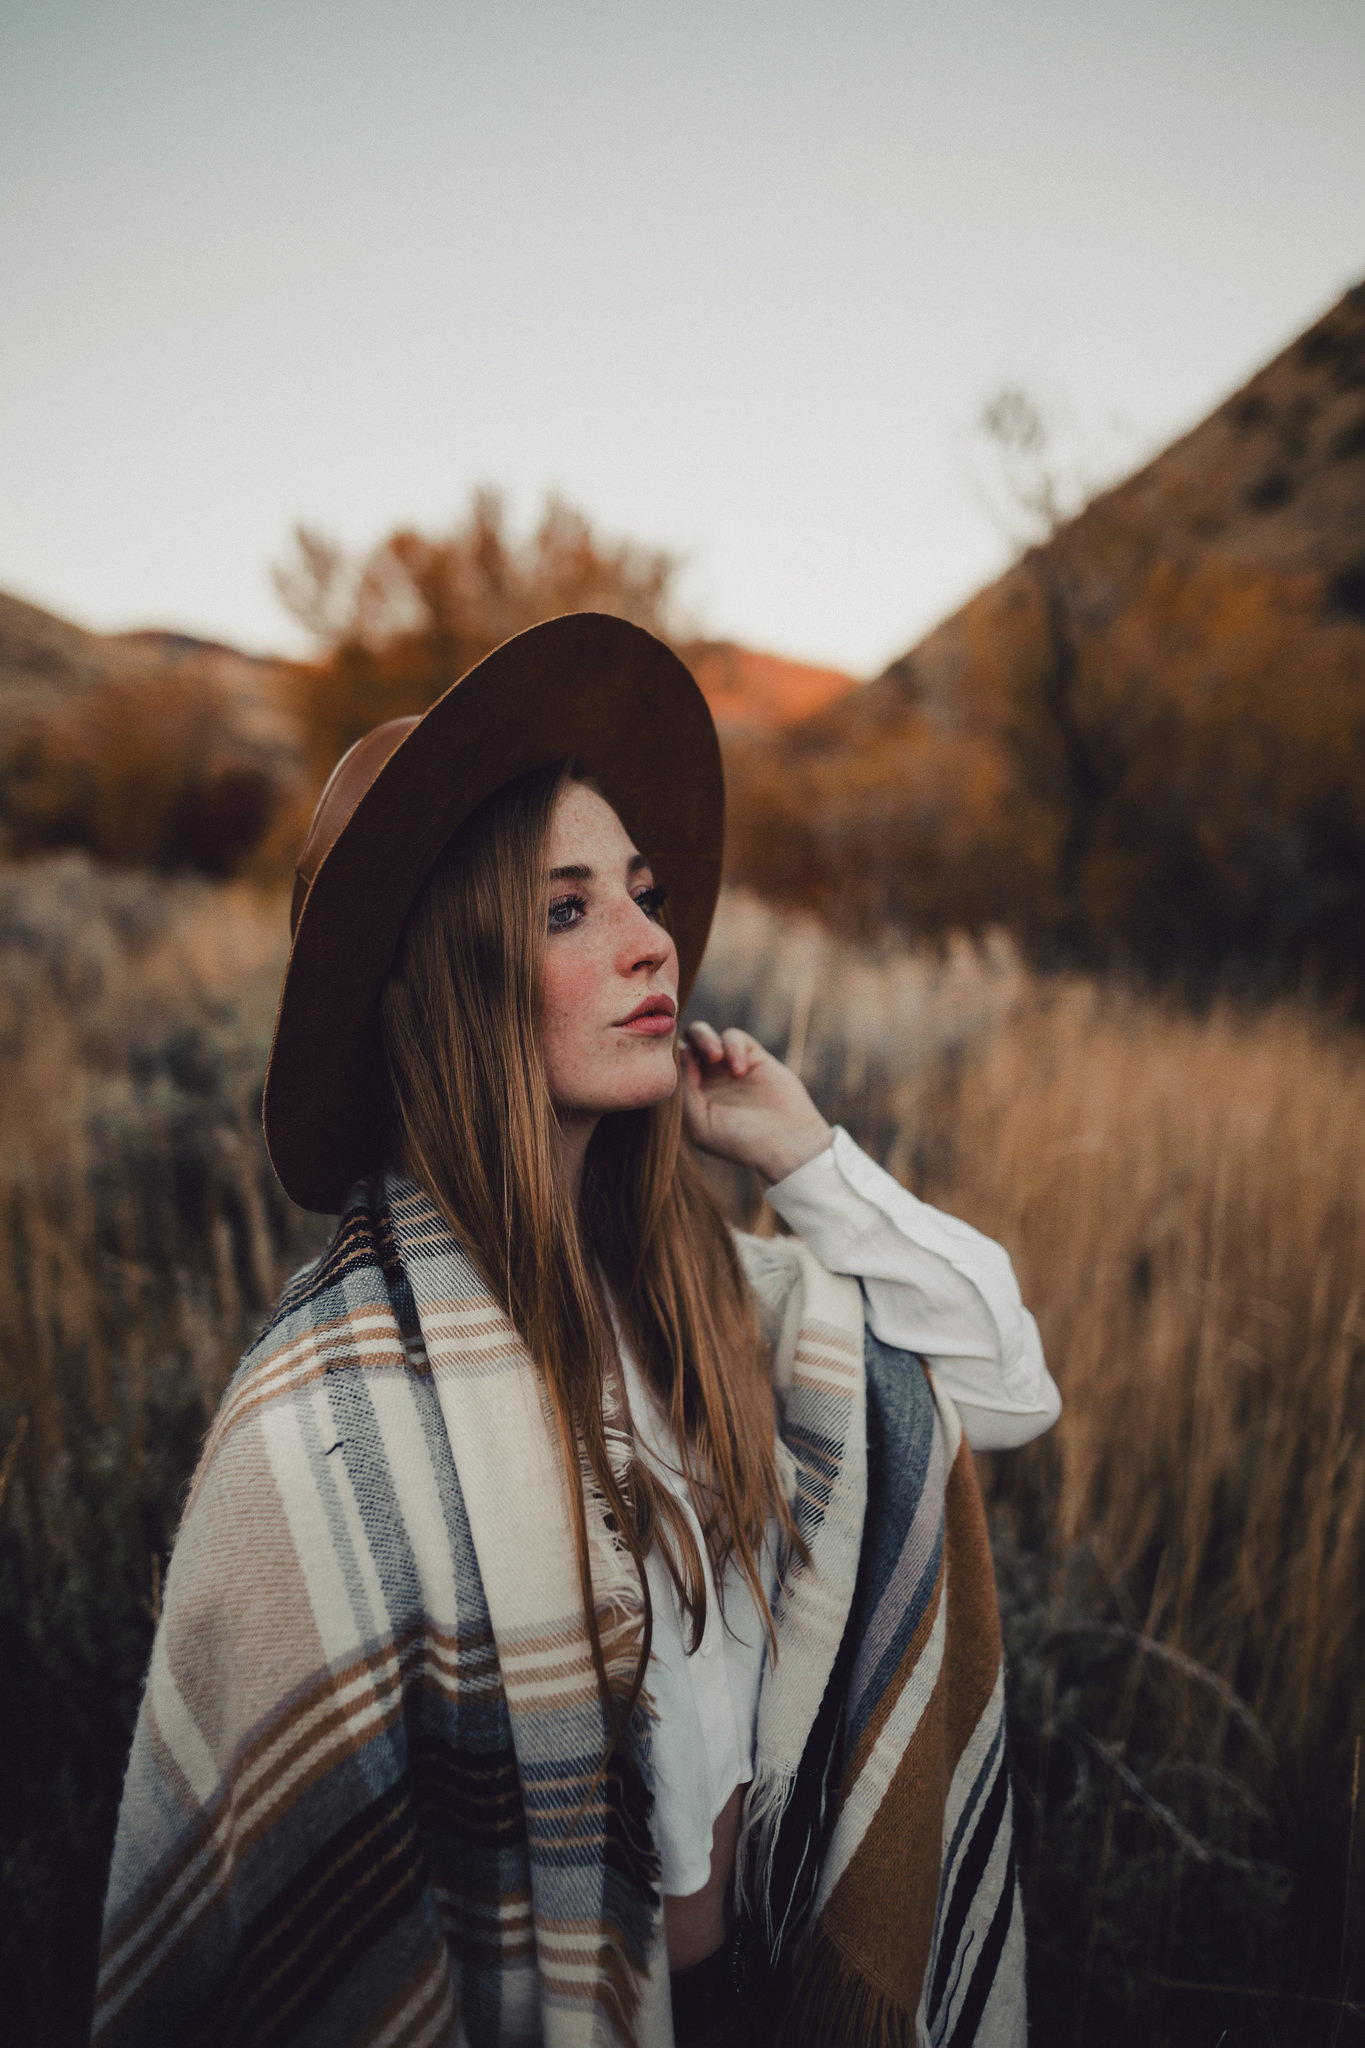 Women Model Looking Away Women With Hats Hat Blankets Shirt Women Outdoors Looking Into The Distance 1365x2048